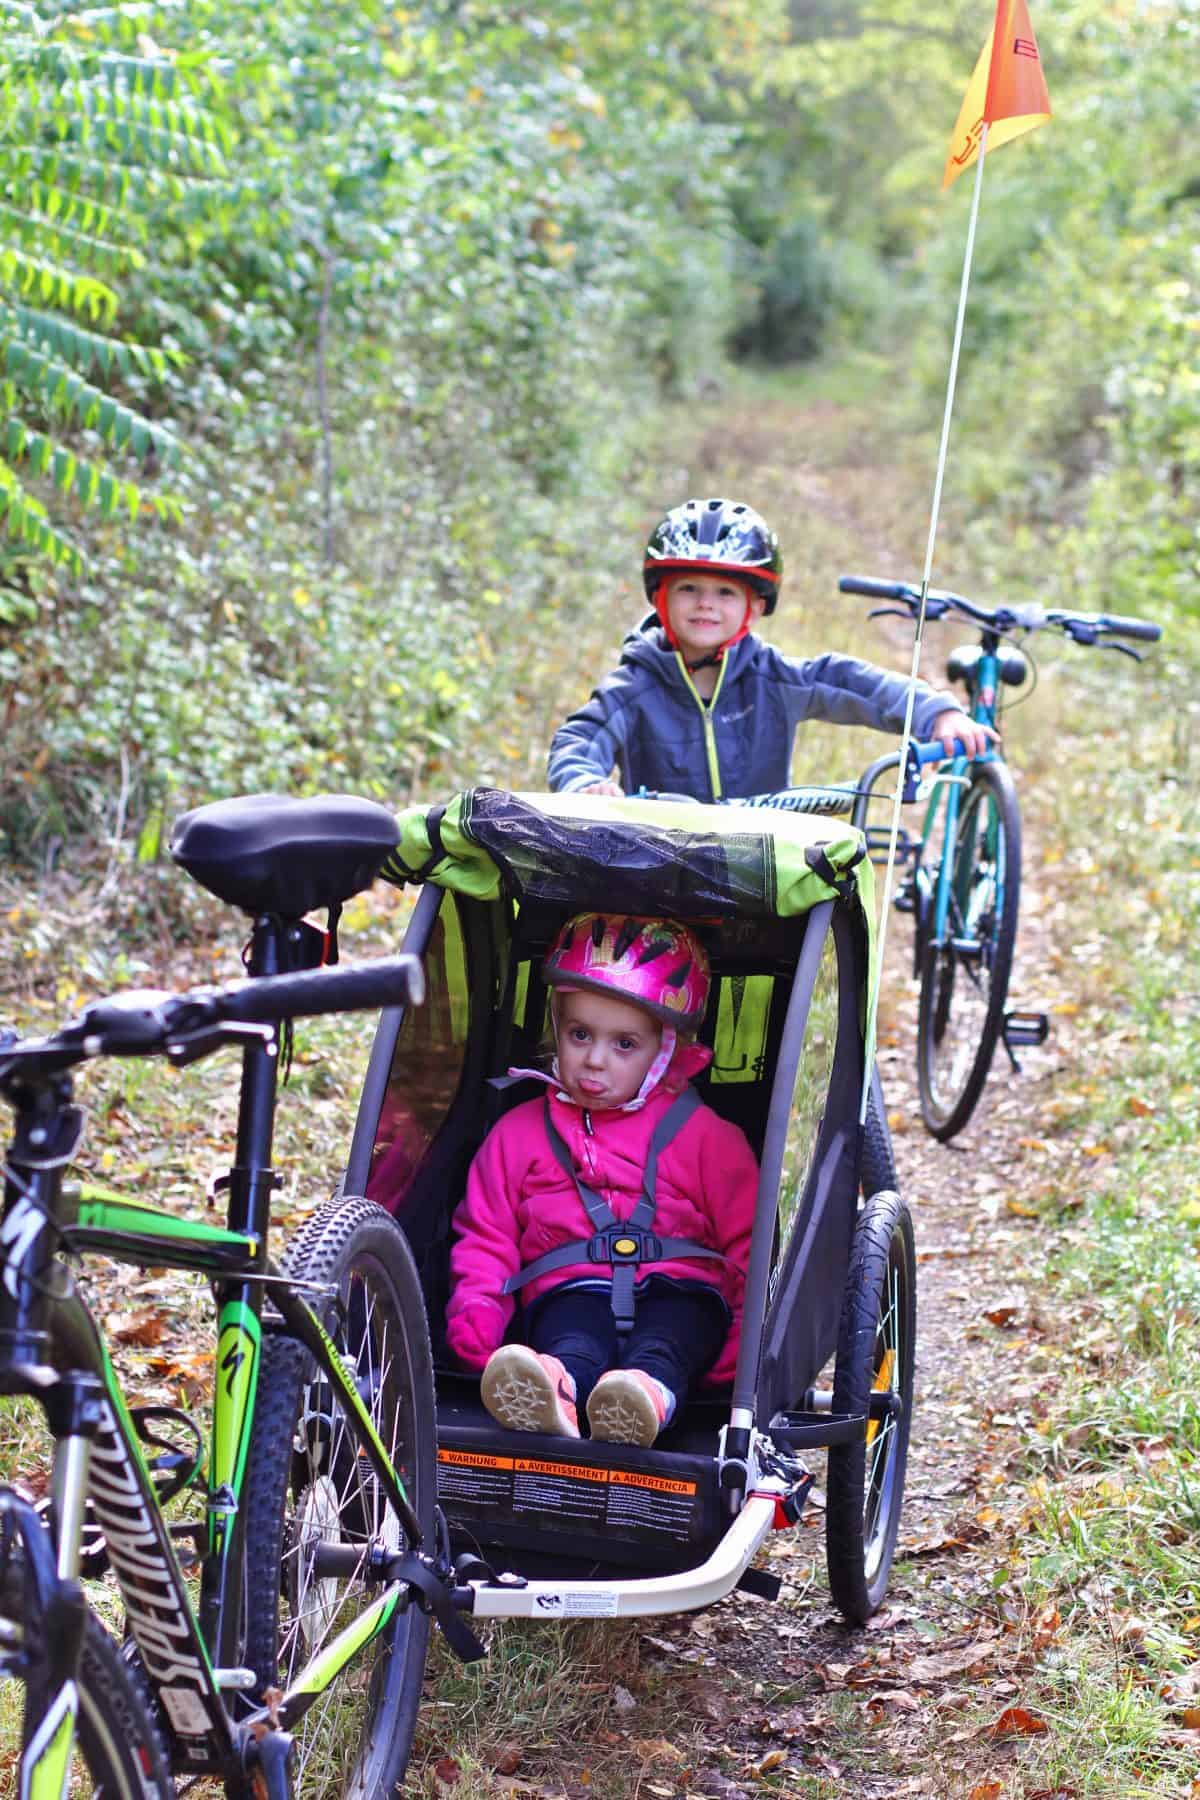 trailer options for biking with kids